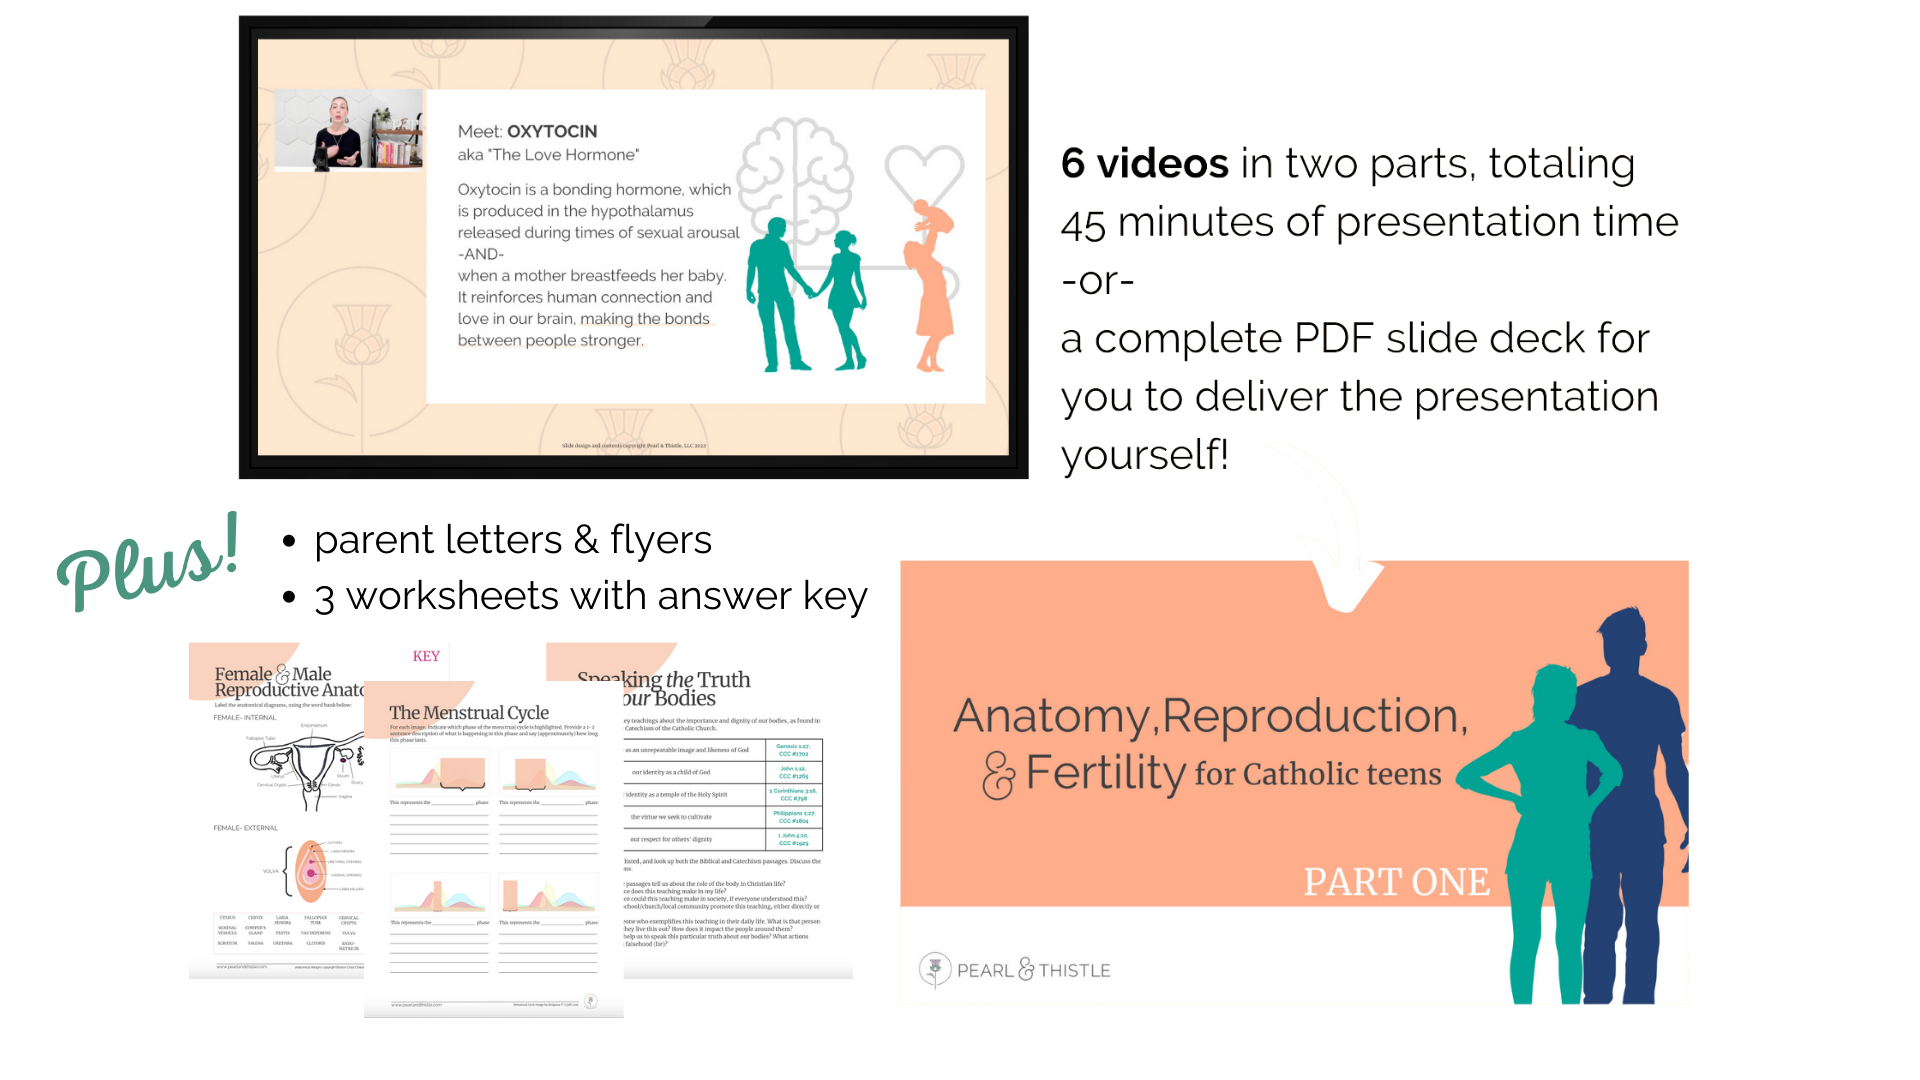 Pictures tablet with scene from Anatomy, Reproduction, & Fertility course; sample slide from course; three worksheets; and the words "6 videos in two parts, totaling 45 minutes of presentation time or a complete PDF slide deck for you to deliver the presentation yourself! Plus parent letters & flyers, 3 worksheets with answer key."